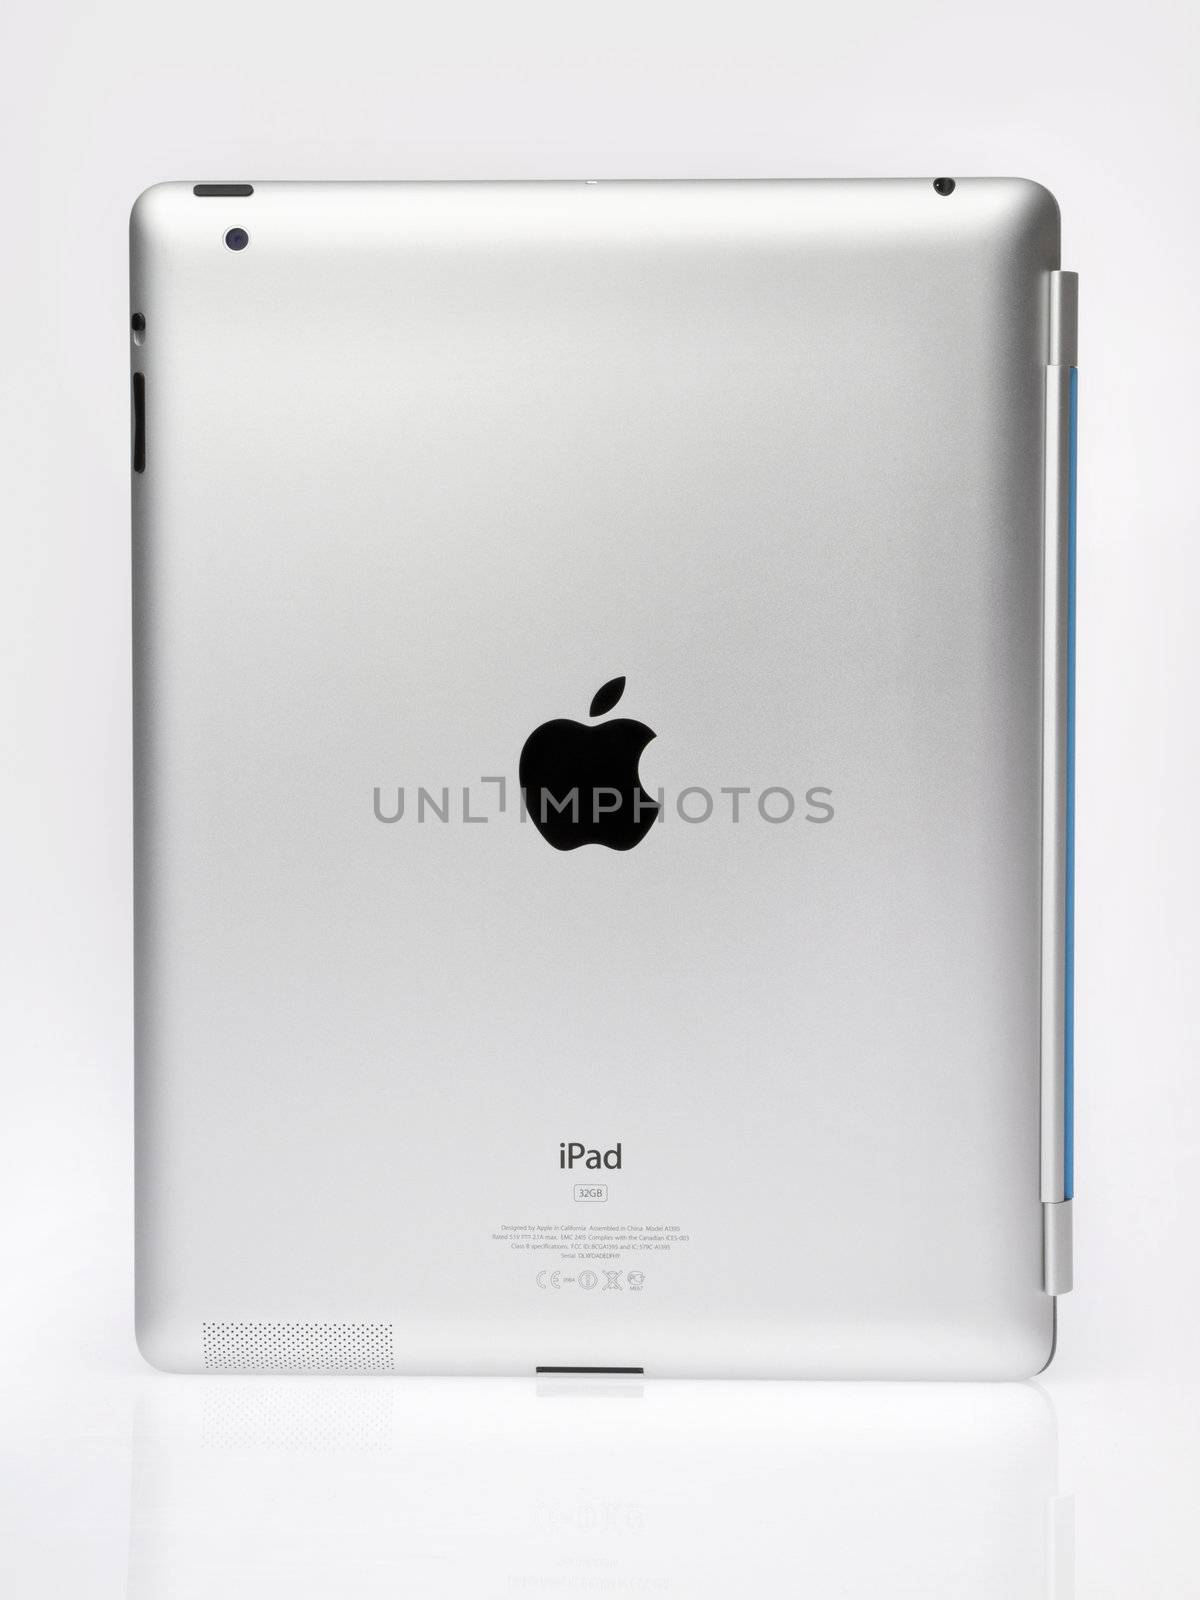 Kiev, Ukraine - June 05, 2011 - Apple Ipad2 with blue Smart cover standing on light gray background. Back View. This second generation Ipad 2 is designed and development by Apple inc. and launched in march 2011. Apple iPad2 with folded Smart cover, isolated on light gray.